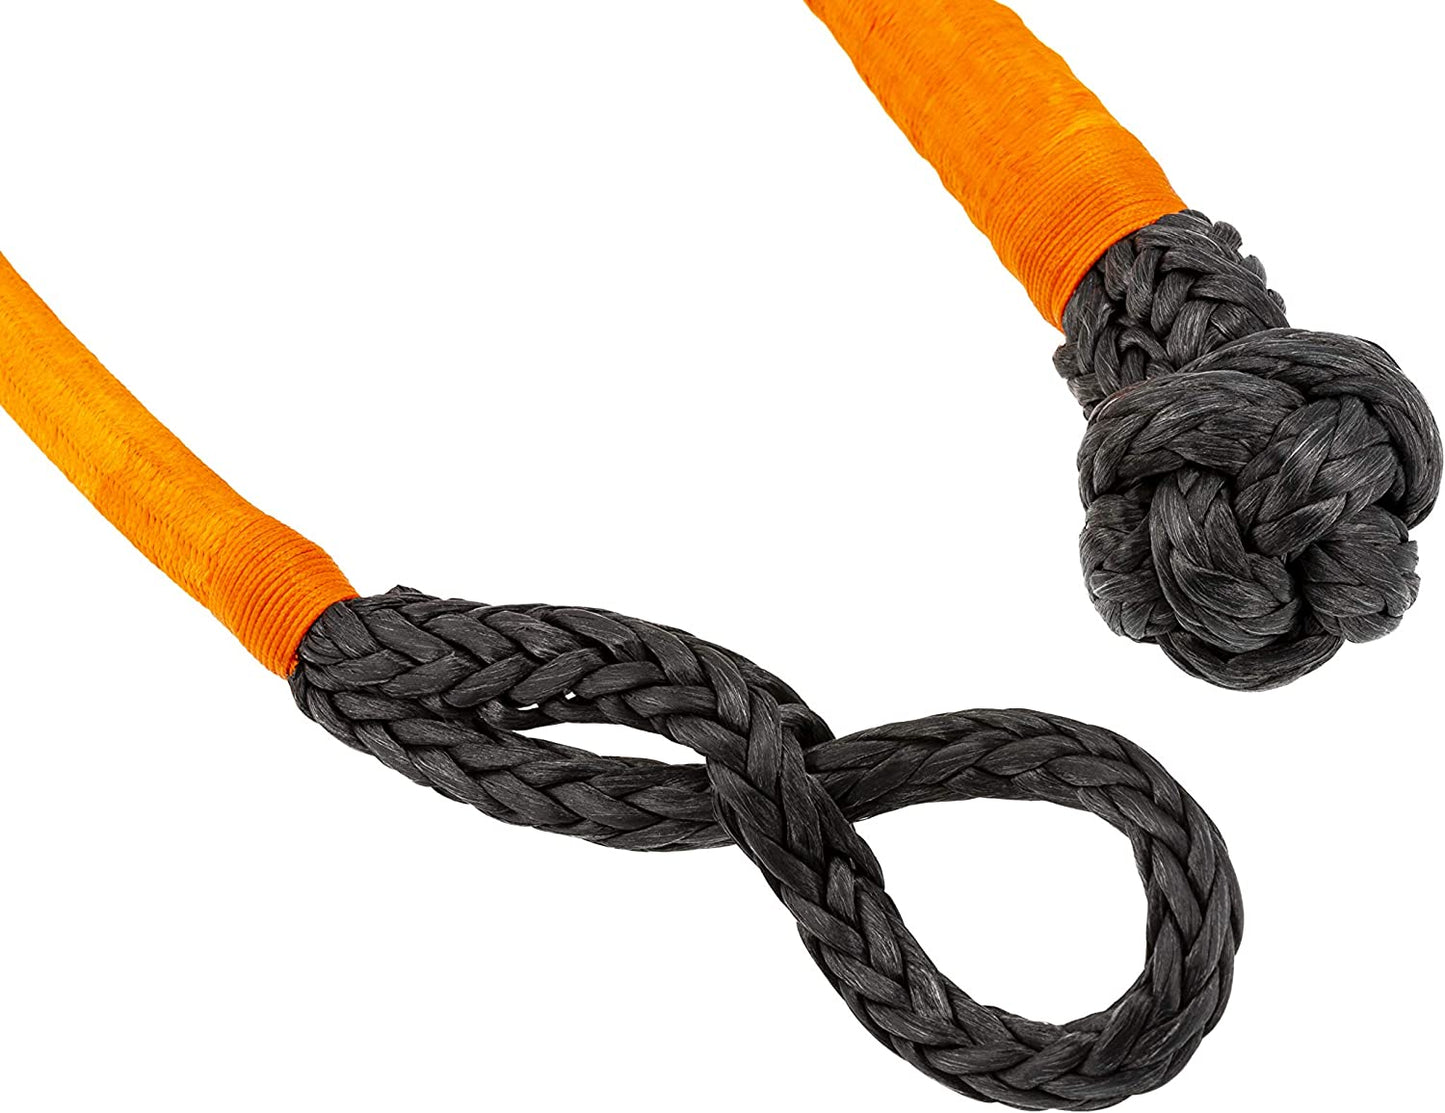 ARB ARB2018 Soft Rope Recovery Connect Shackle up to 32000 Lbs / 14.5 Ton, Includes Mesh Gift Bag